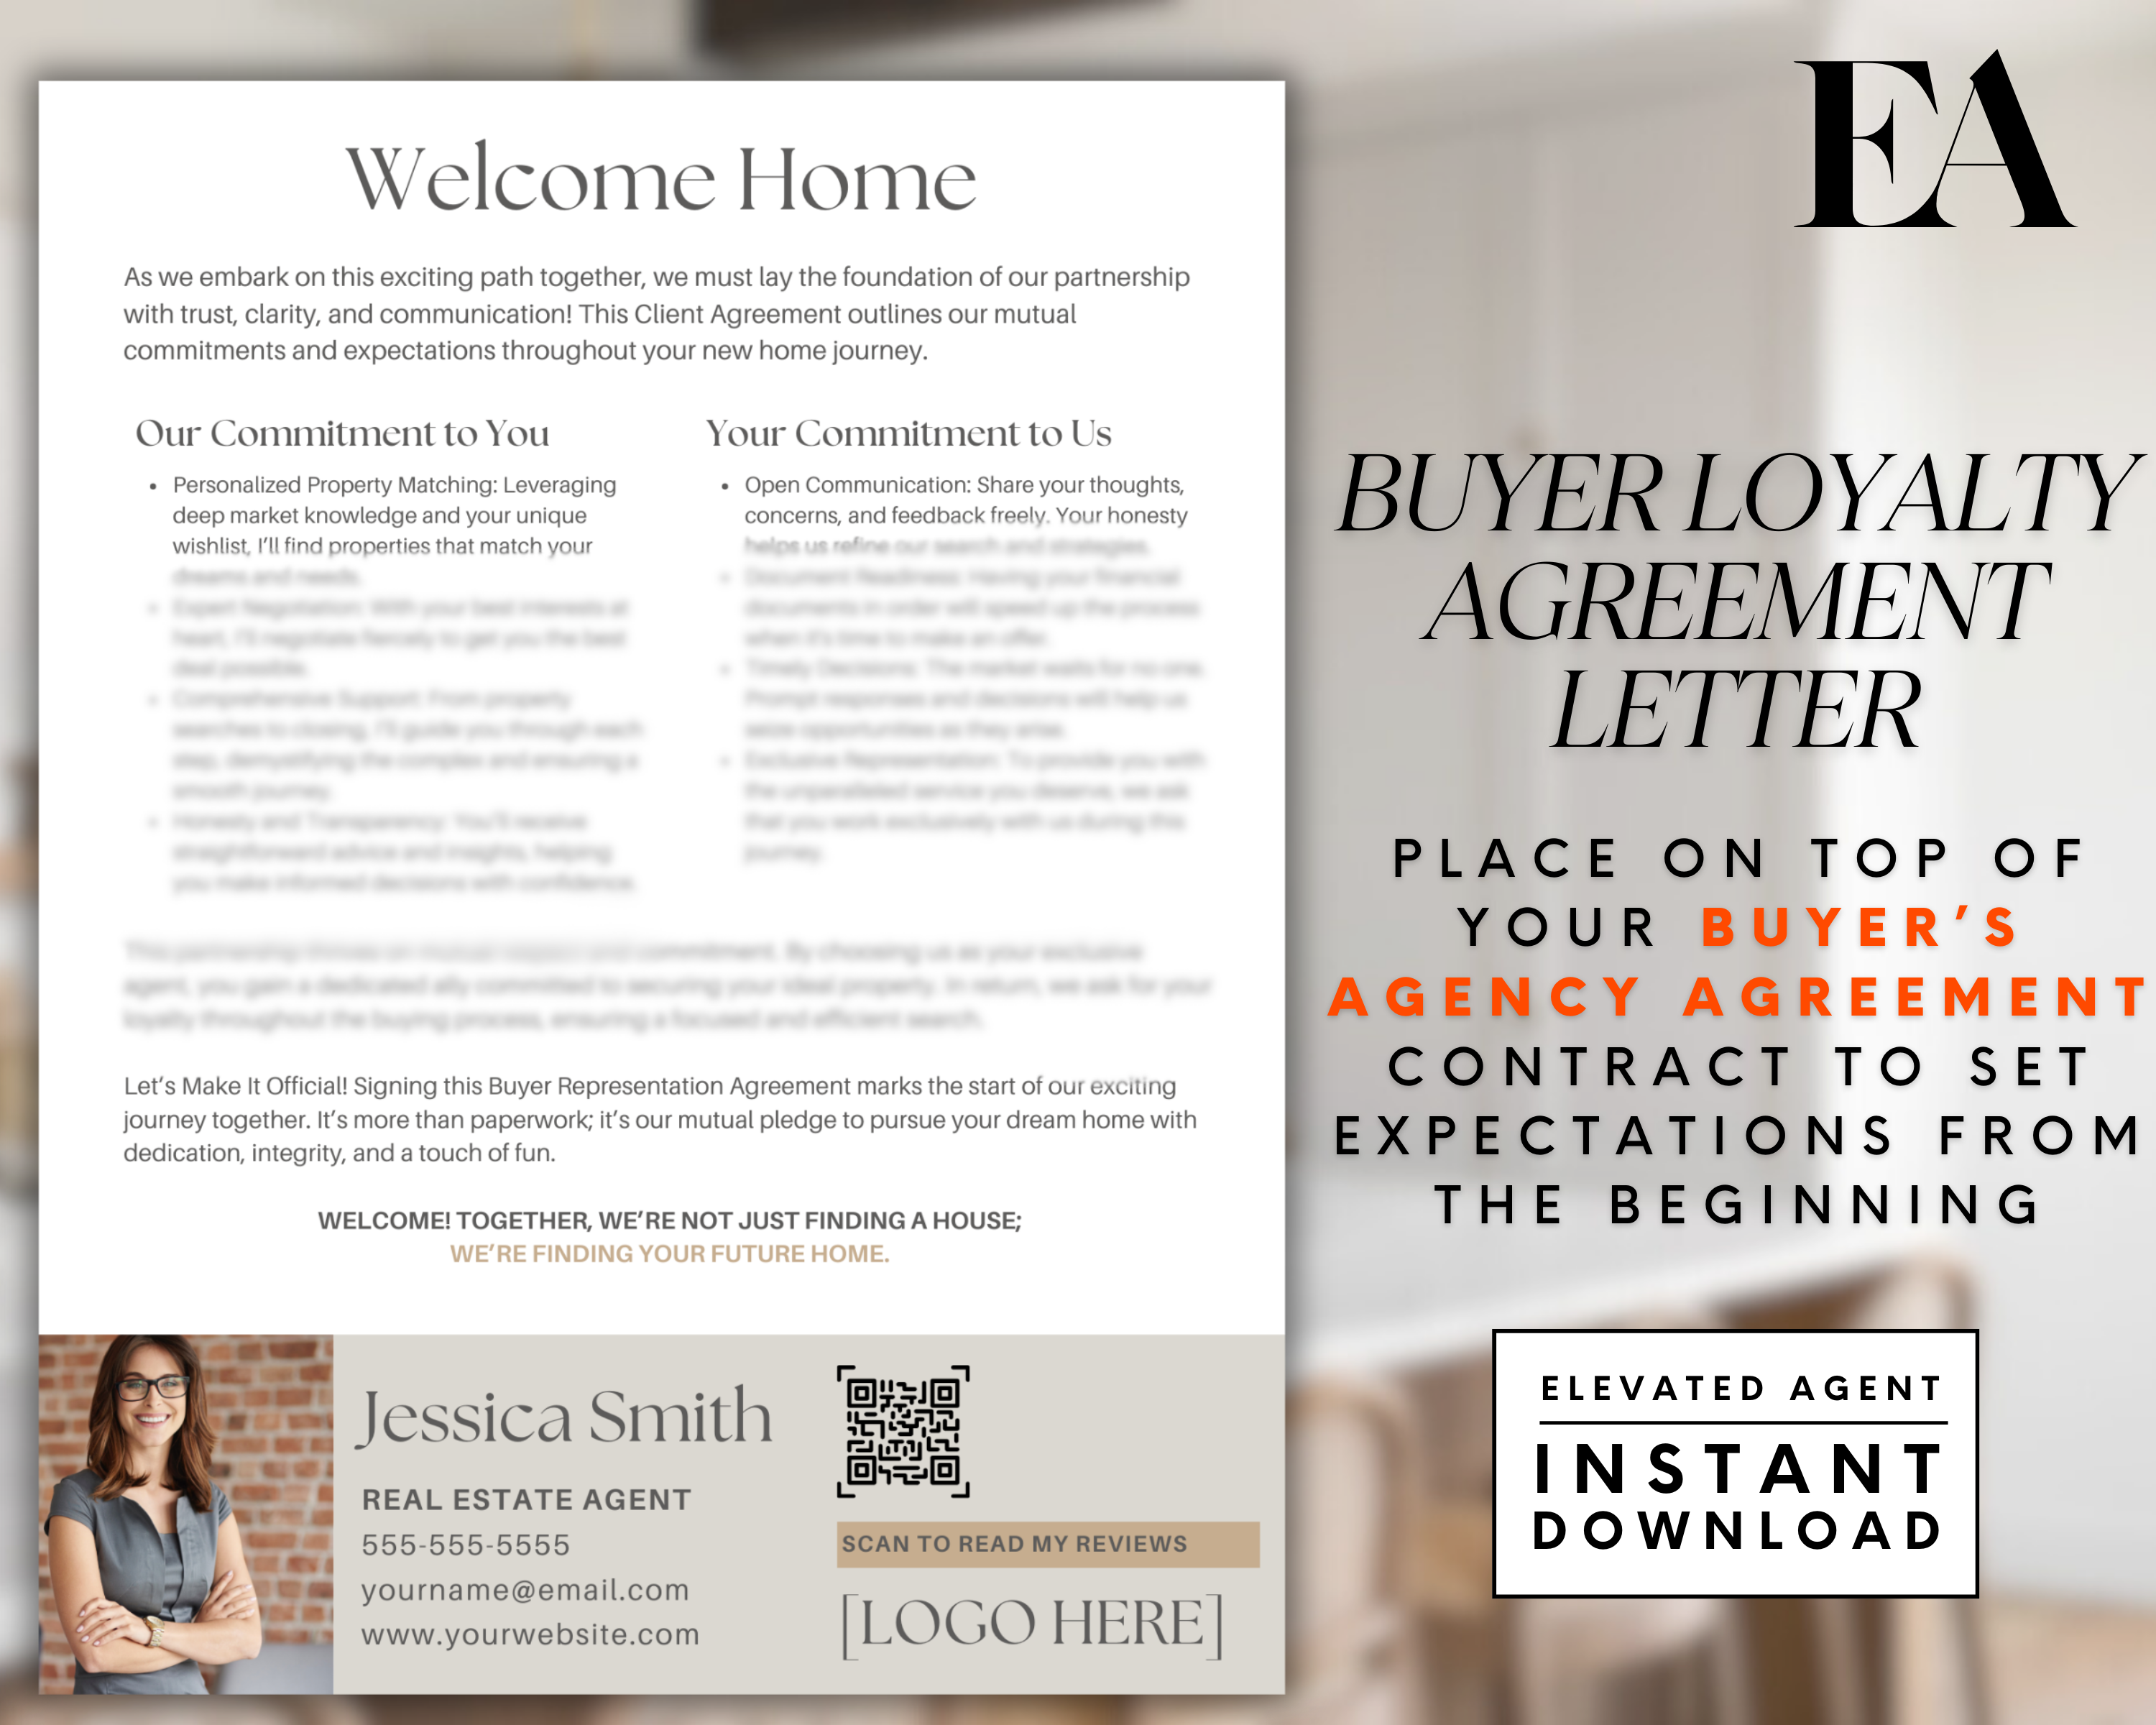 contract template, real estate flyer, moving checklist, buyer questionnaire, realtor marketing real estate postcard buyers guide, Buyer presentation, Real estate letter, Home Buyer Letter, Buyer Agreement, Agency Agreemen